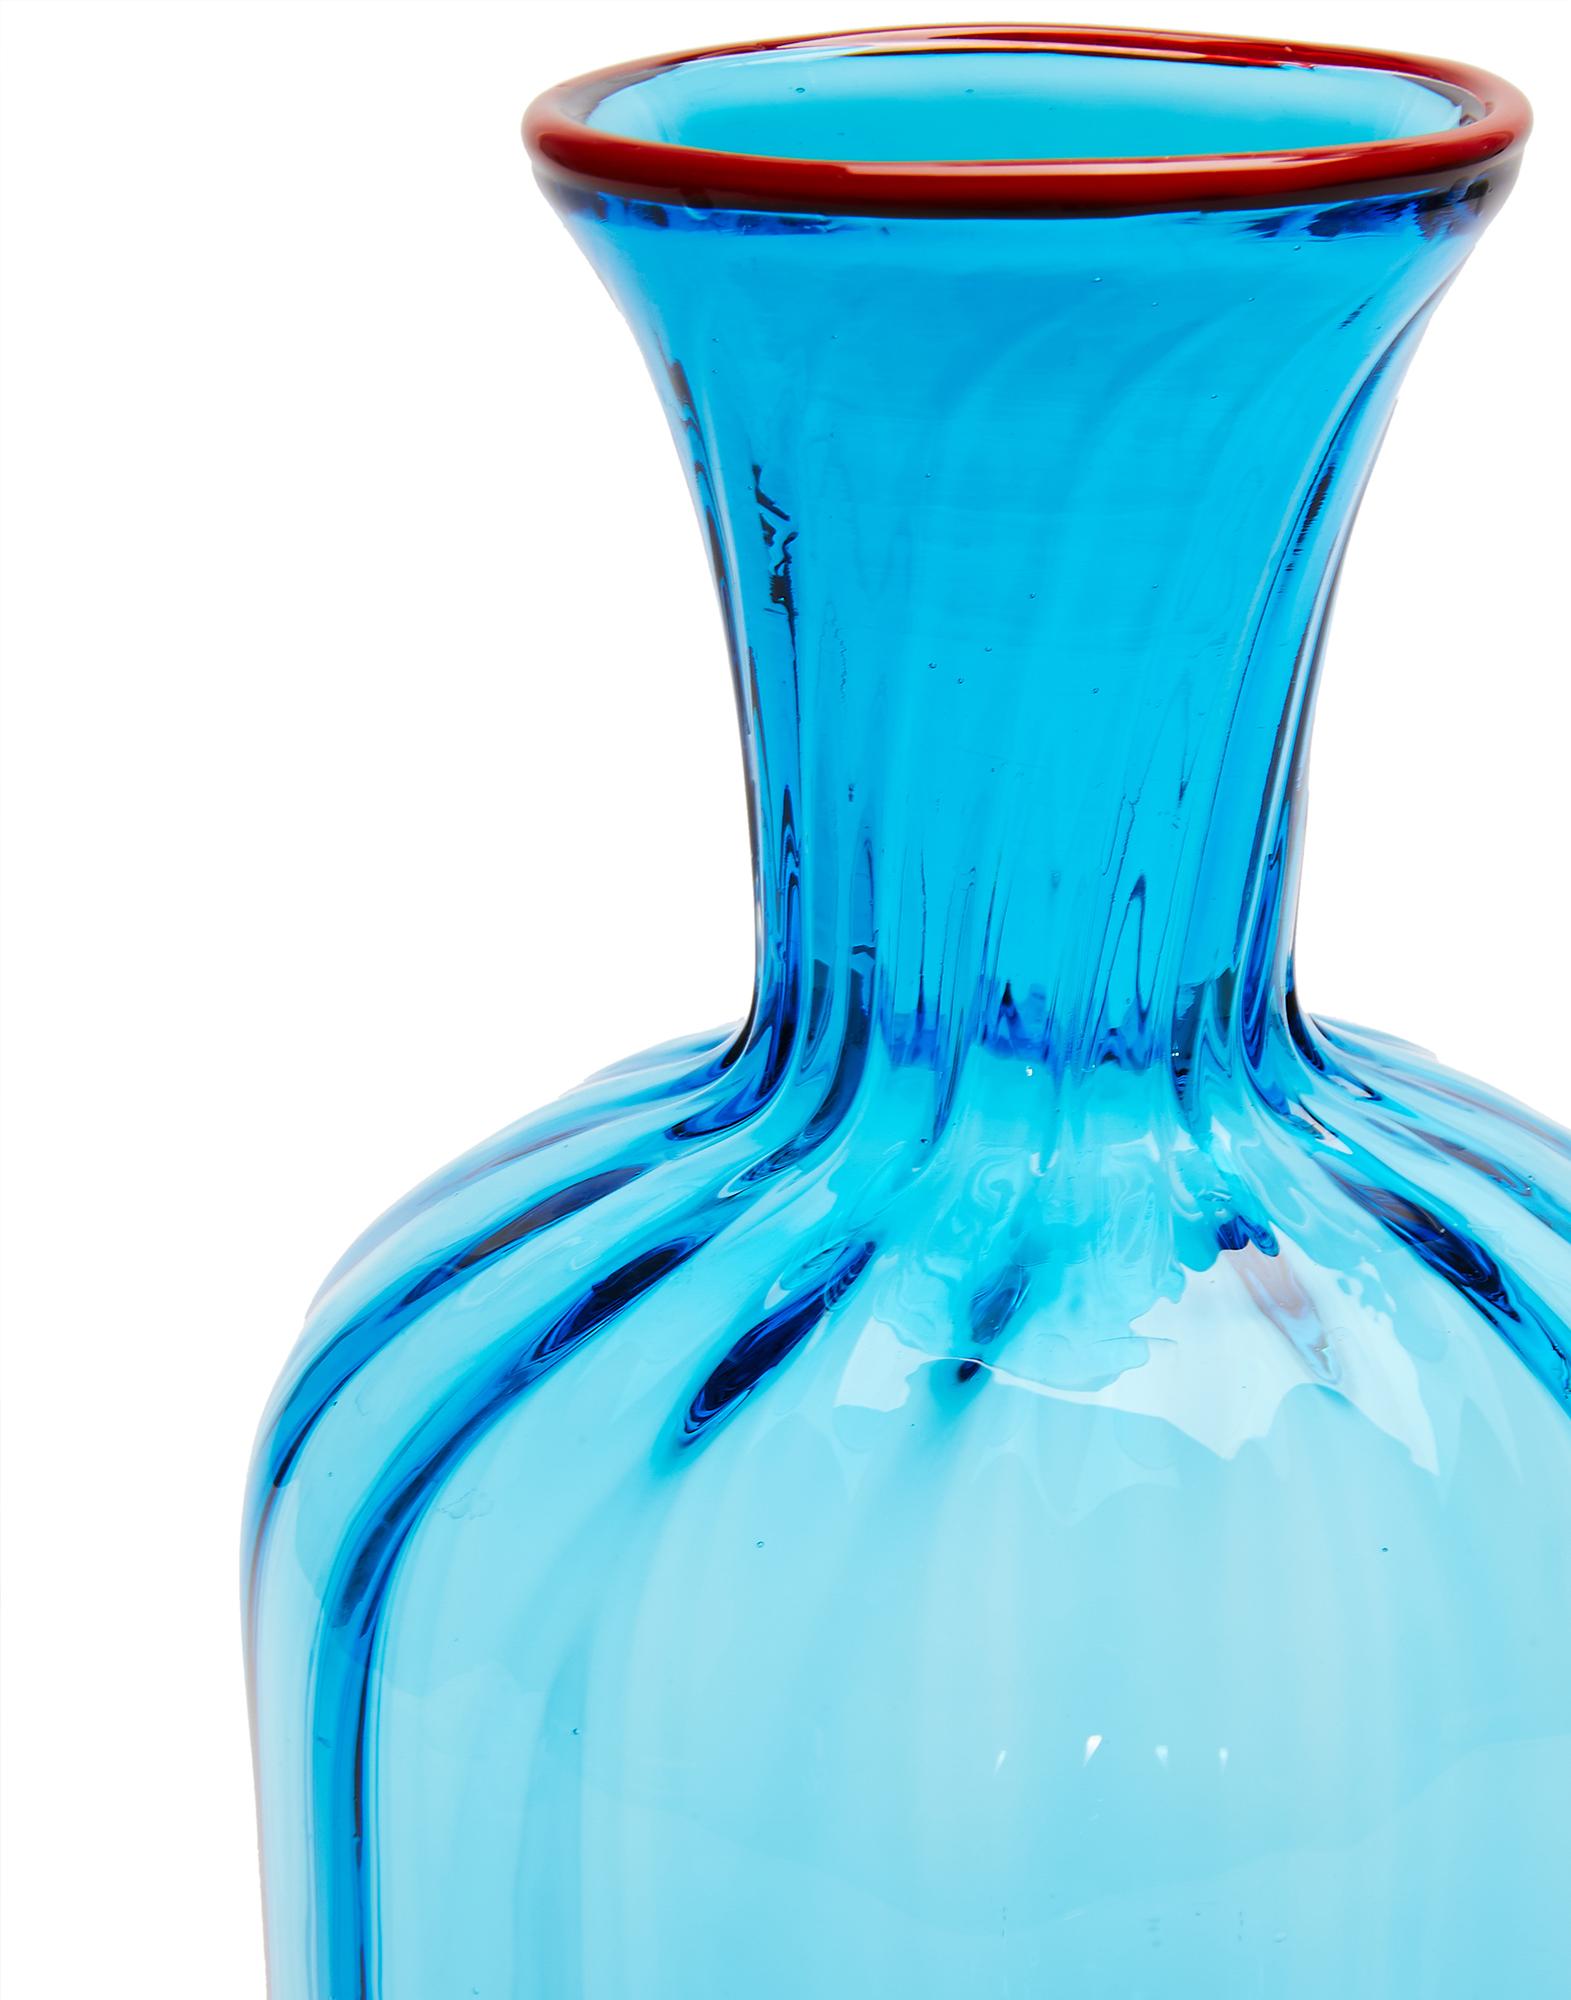 Hostesses, get ready to share the compliments with this showstopping carafe, destined to be the conversation piece of any minimalist or maximalist dinner party. Crafted from hand-blown Murano glass by the Venetian glass masters Salviati, it has a